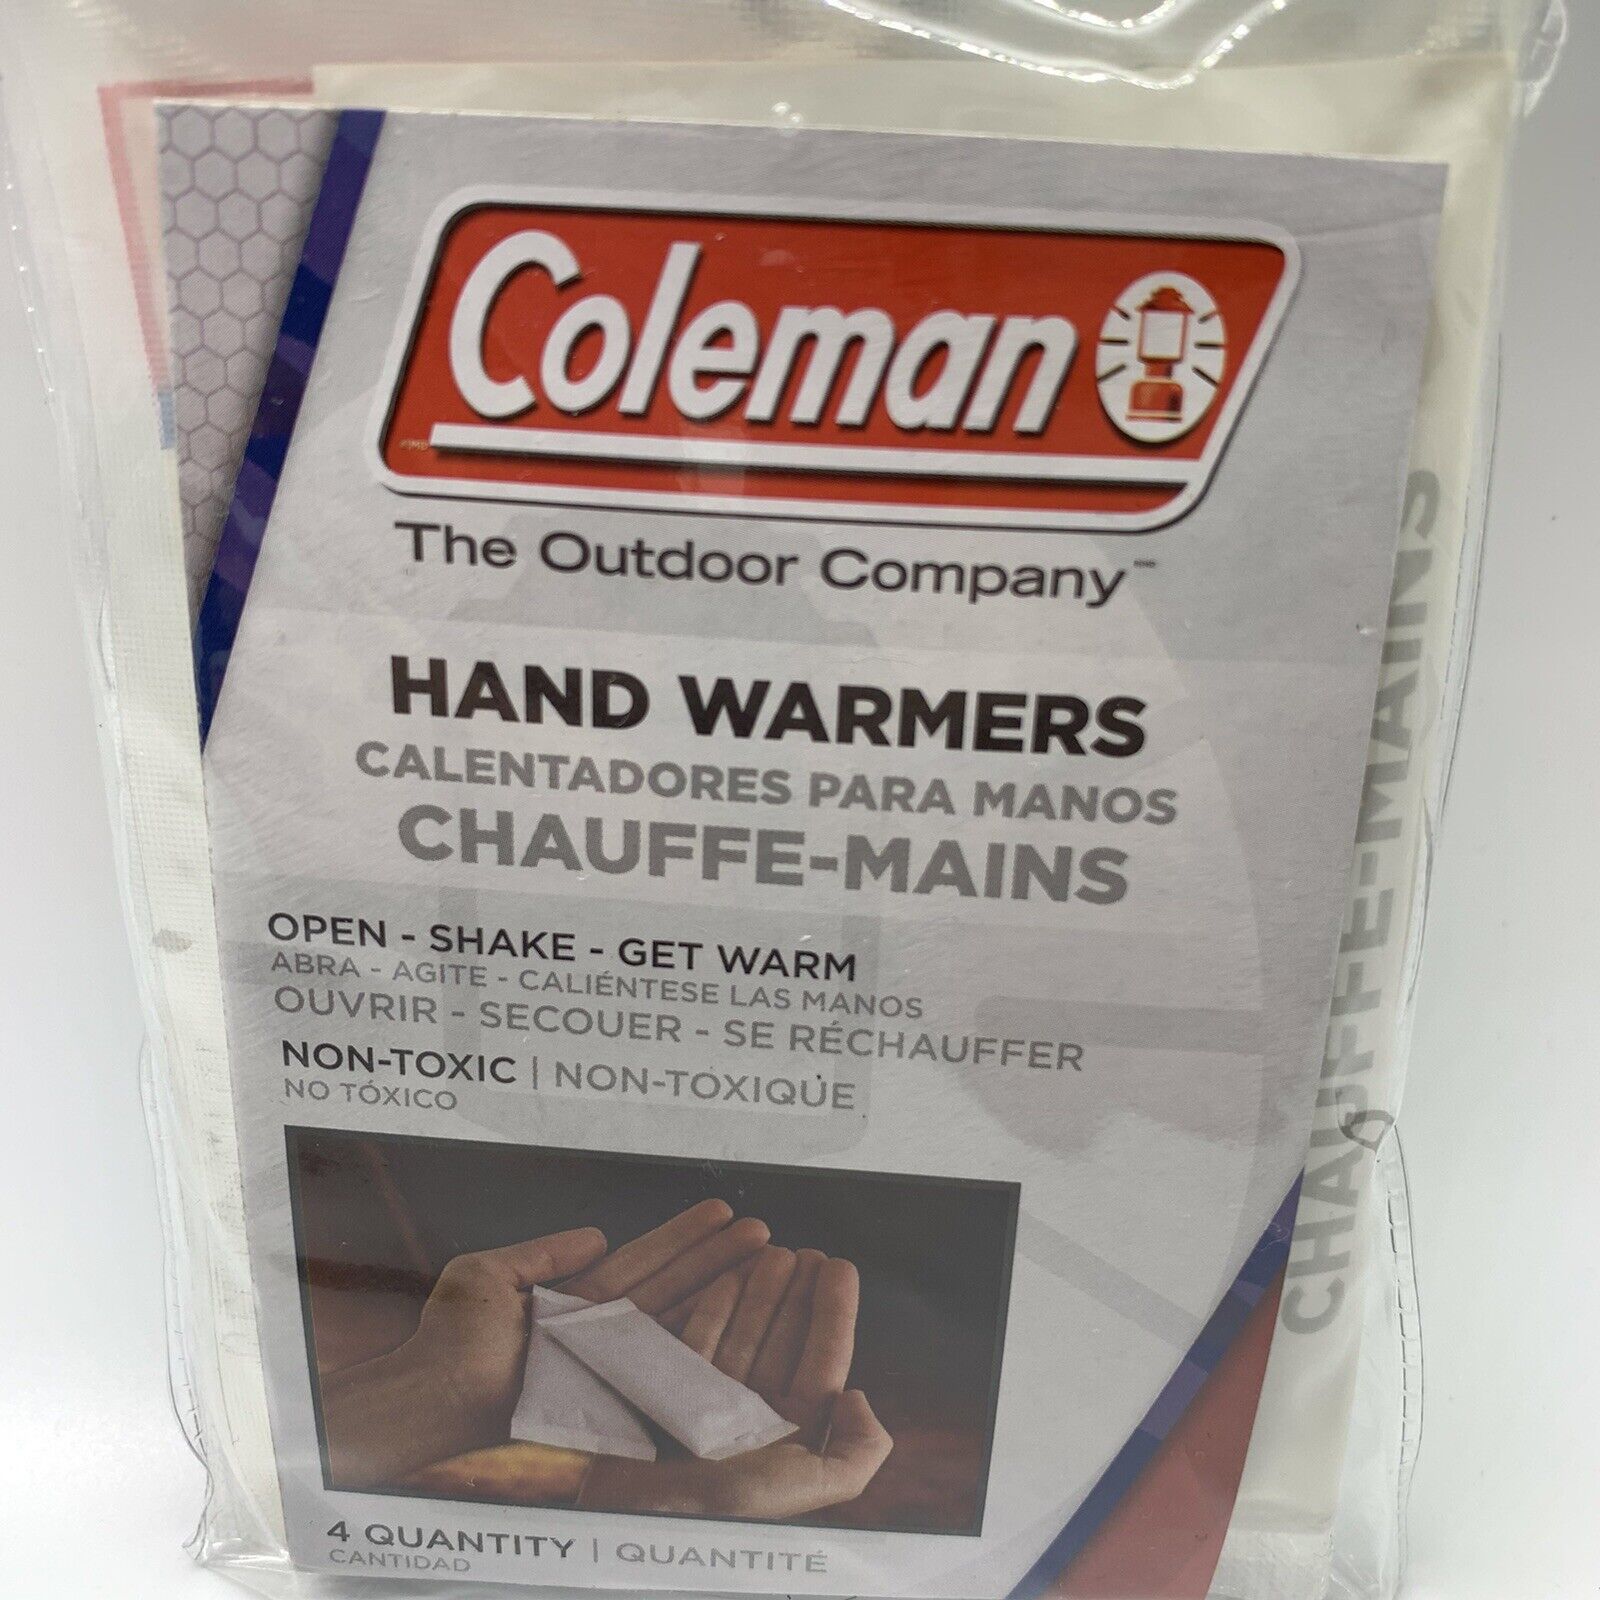 Lot of 3 Coleman Hand Warmers 4 Packs (8 Total) - Buy More And Save More New Coleman 20161116 - фотография #2